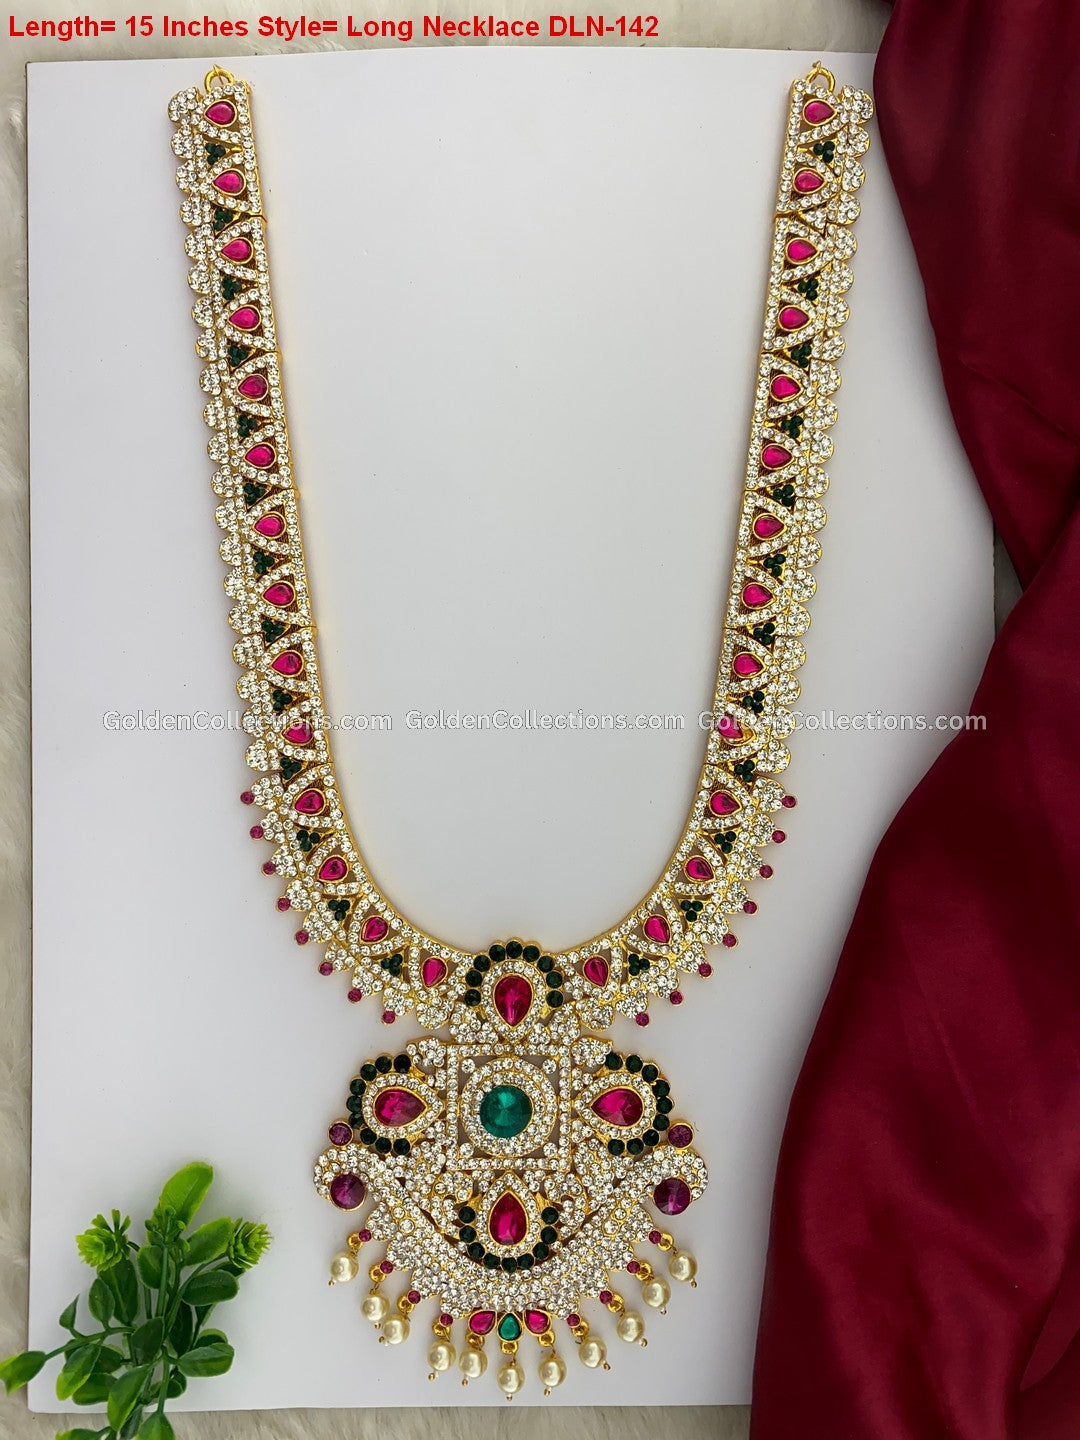 Hindu God Jewellery in Gold - GoldenCollections DLN-142